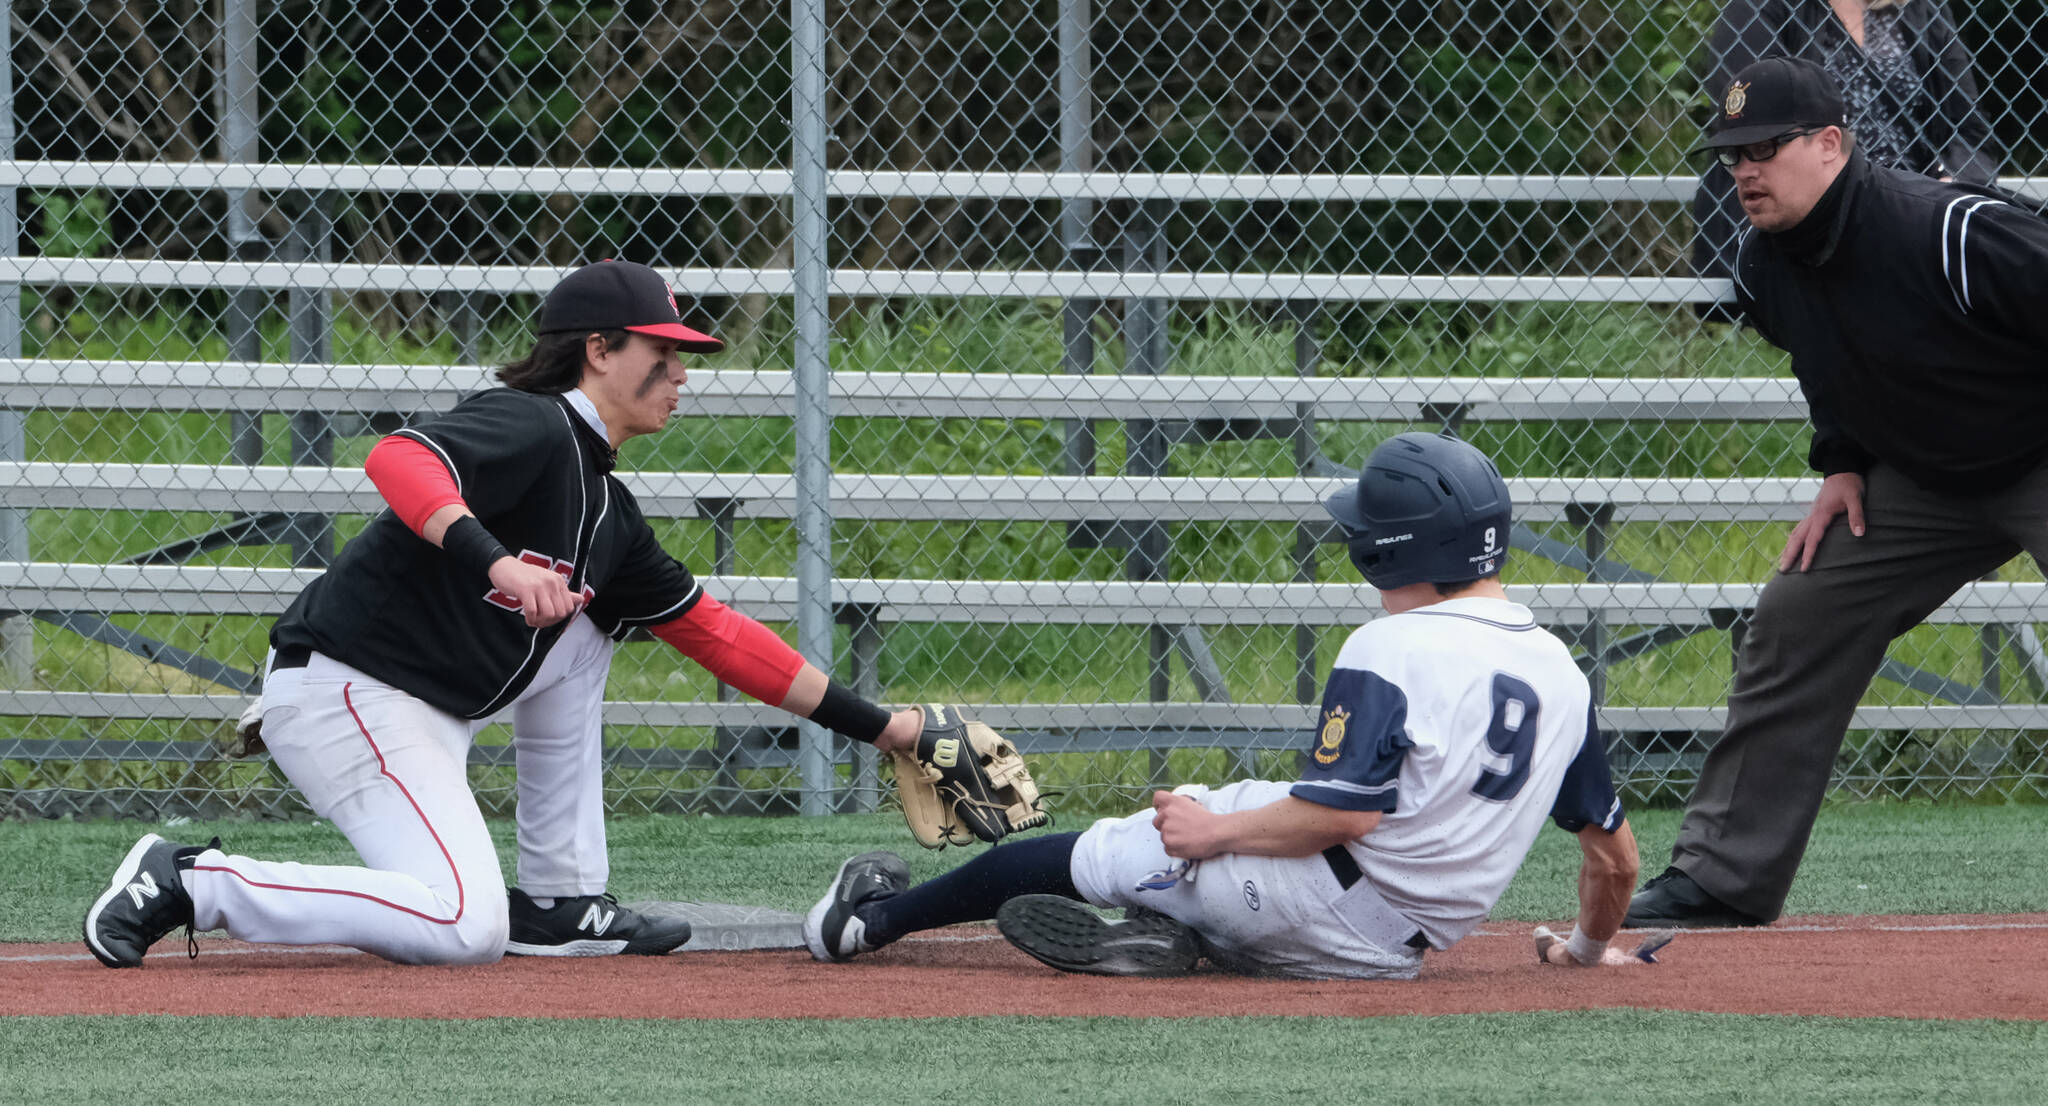 JDHS junior third baseman Landon Simonson tags out an Eagle River base runner during the Crimson Bears 2-1 loss to the Wolves in an elimination game Friday at the ASAA Division I State Baseball Championships on Sitka’s Moller Field. (Klas Stolpe / Juneau Empire)